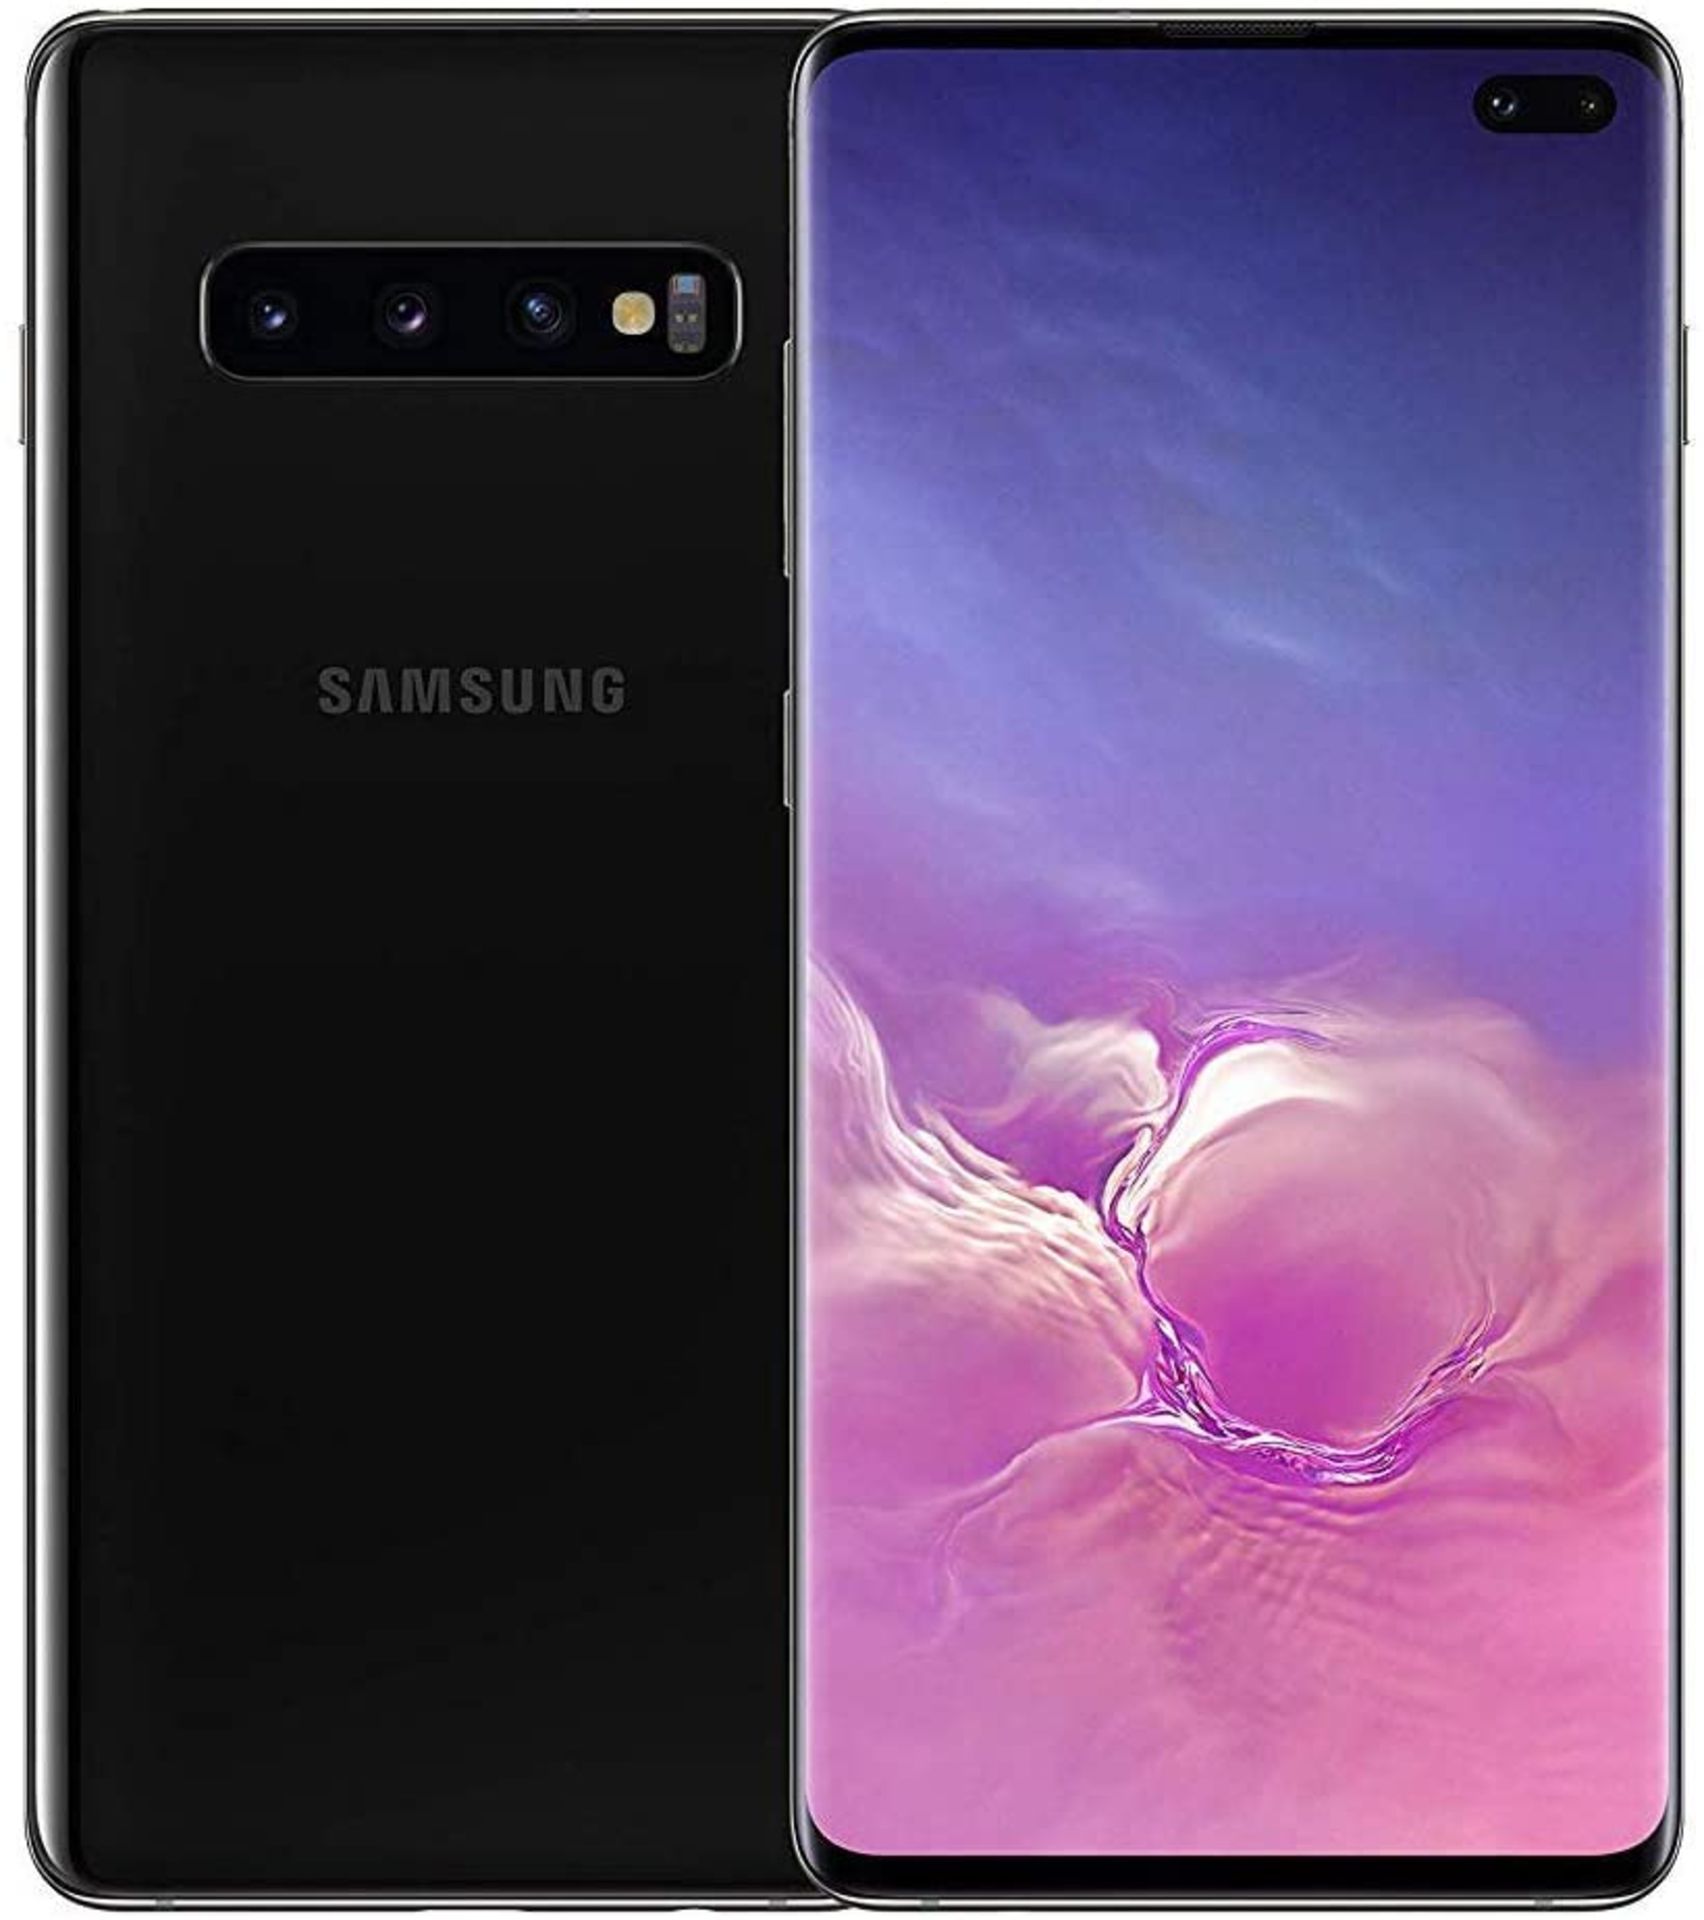 + VAT Grade A Samsung Galaxy S10 Mobile Phone - 128Gb - Black/Blue/Gold/Purple - Item Is Available